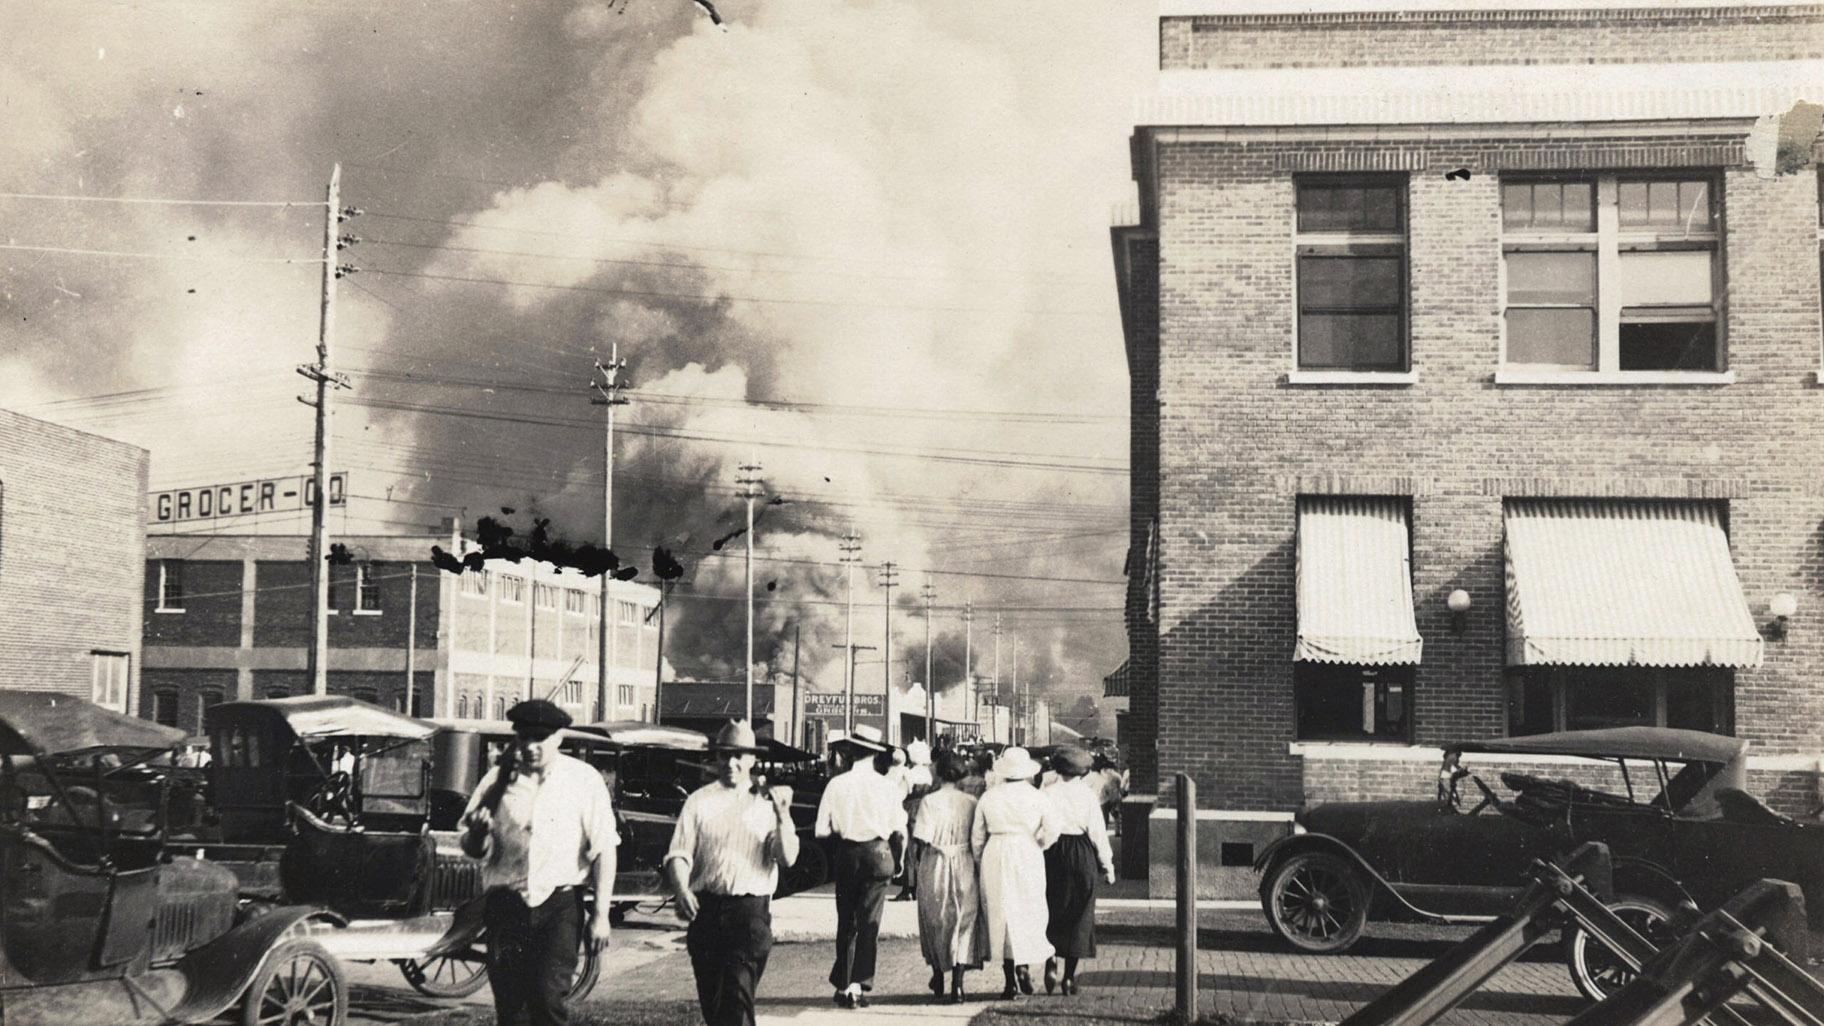 In this photo provided by Department of Special Collections, McFarlin Library, The University of Tulsa, two armed men walk away from burning buildings as others walk in the opposite direction during the June 1, 1921, Tulsa Race Massacre in Tulsa, Okla. (Department of Special Collections, McFarlin Library, The University of Tulsa via AP, File)